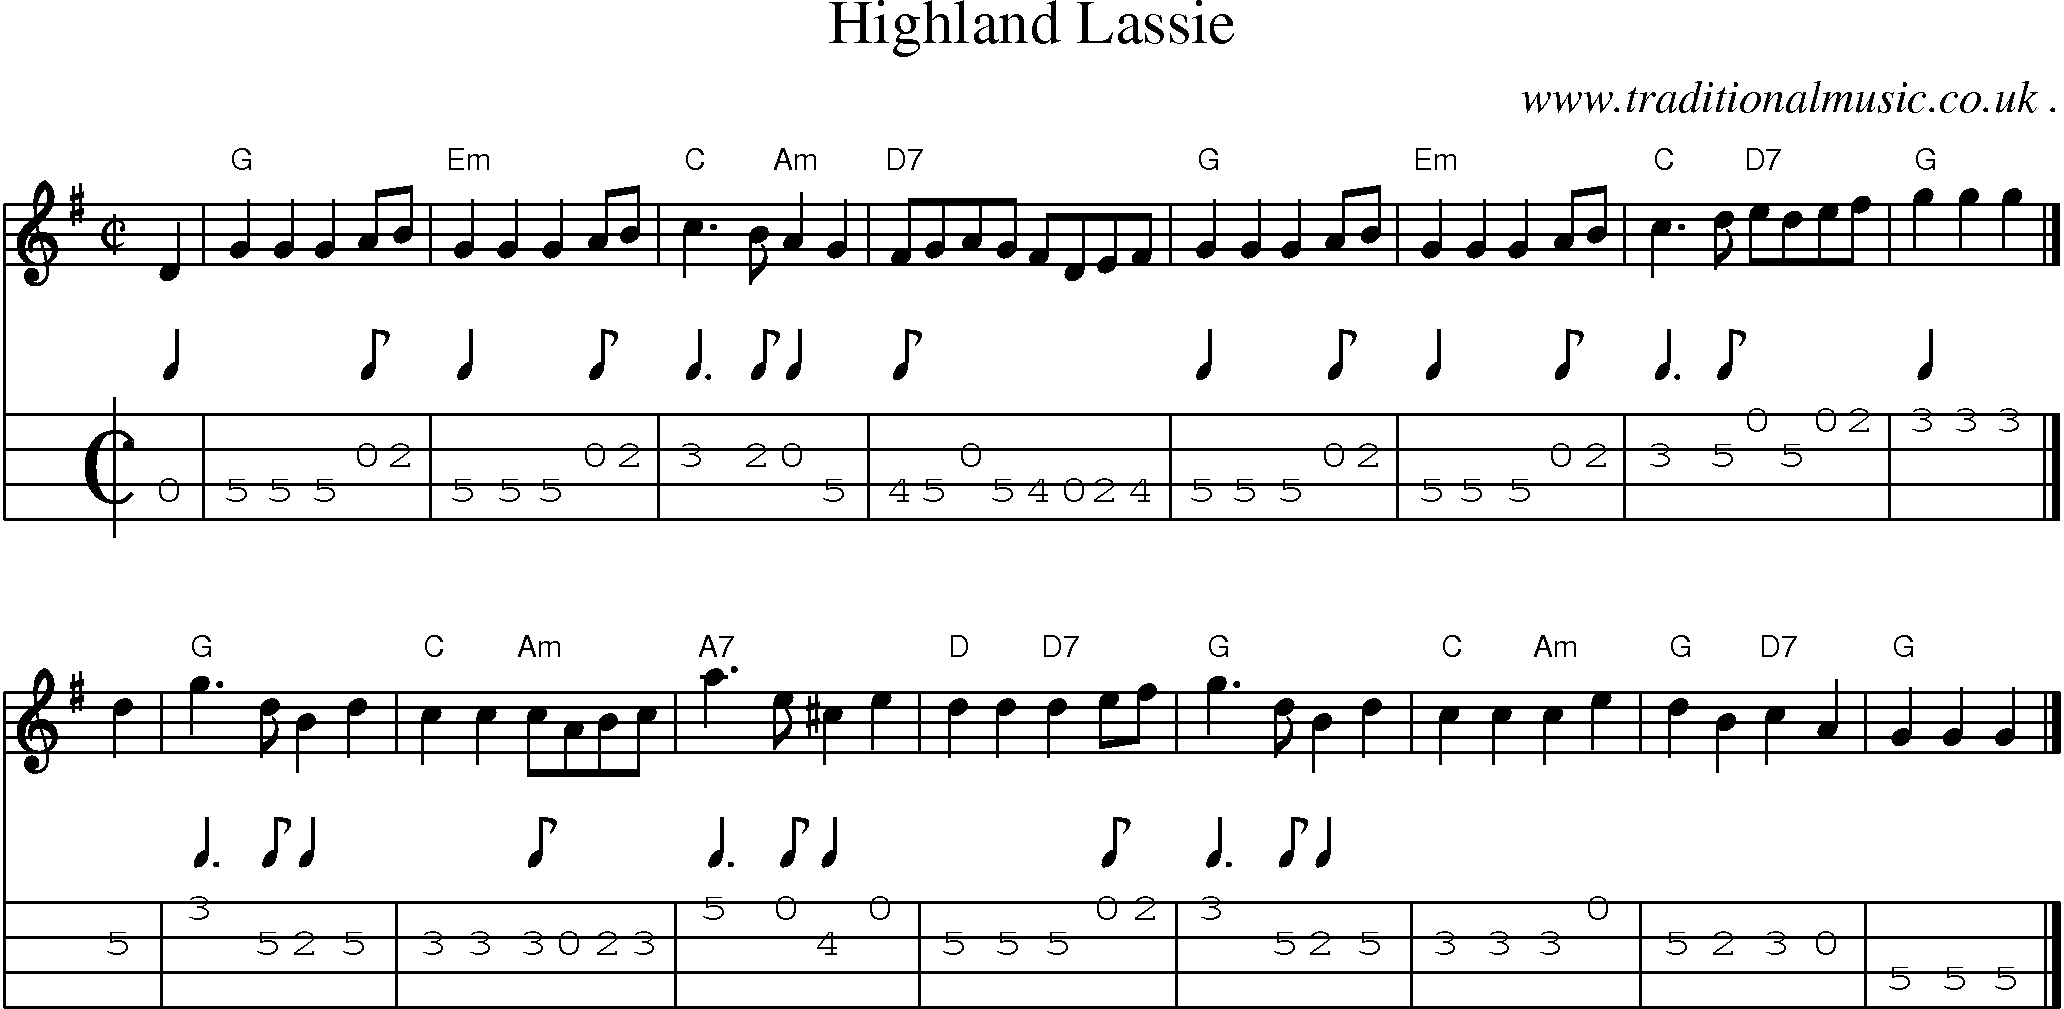 Sheet-music  score, Chords and Mandolin Tabs for Highland Lassie